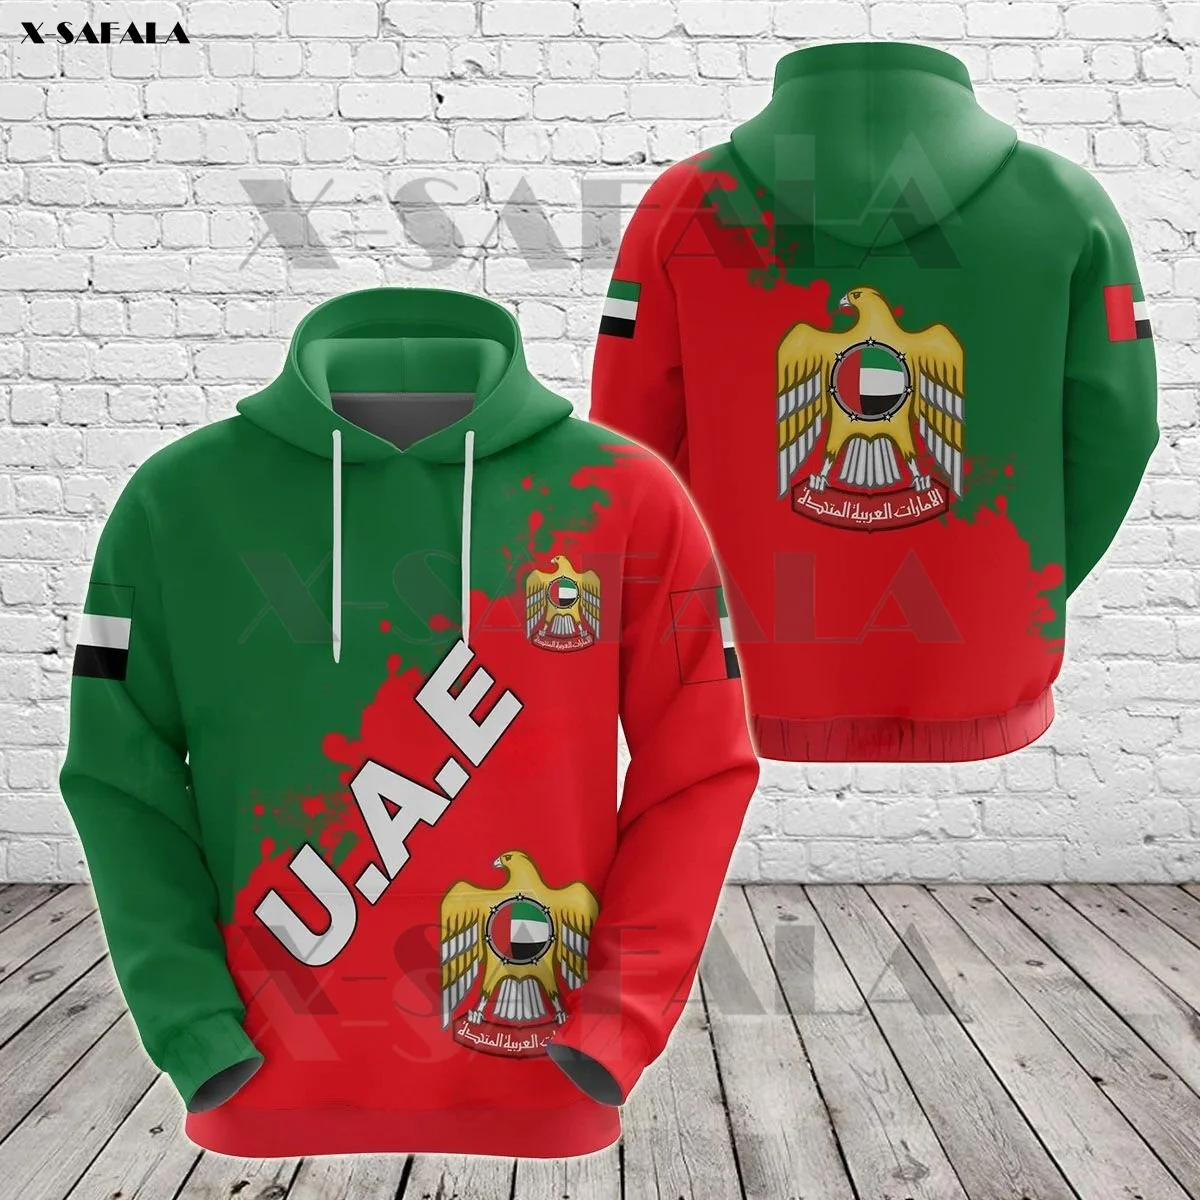 

UNITED ARAB EMIRATES SMUDGE COAT OF ARMS Flag 3D Printed Zipper Hoodie Man Pullover Sweatshirt Hooded Jacket Jersey Tracksuits